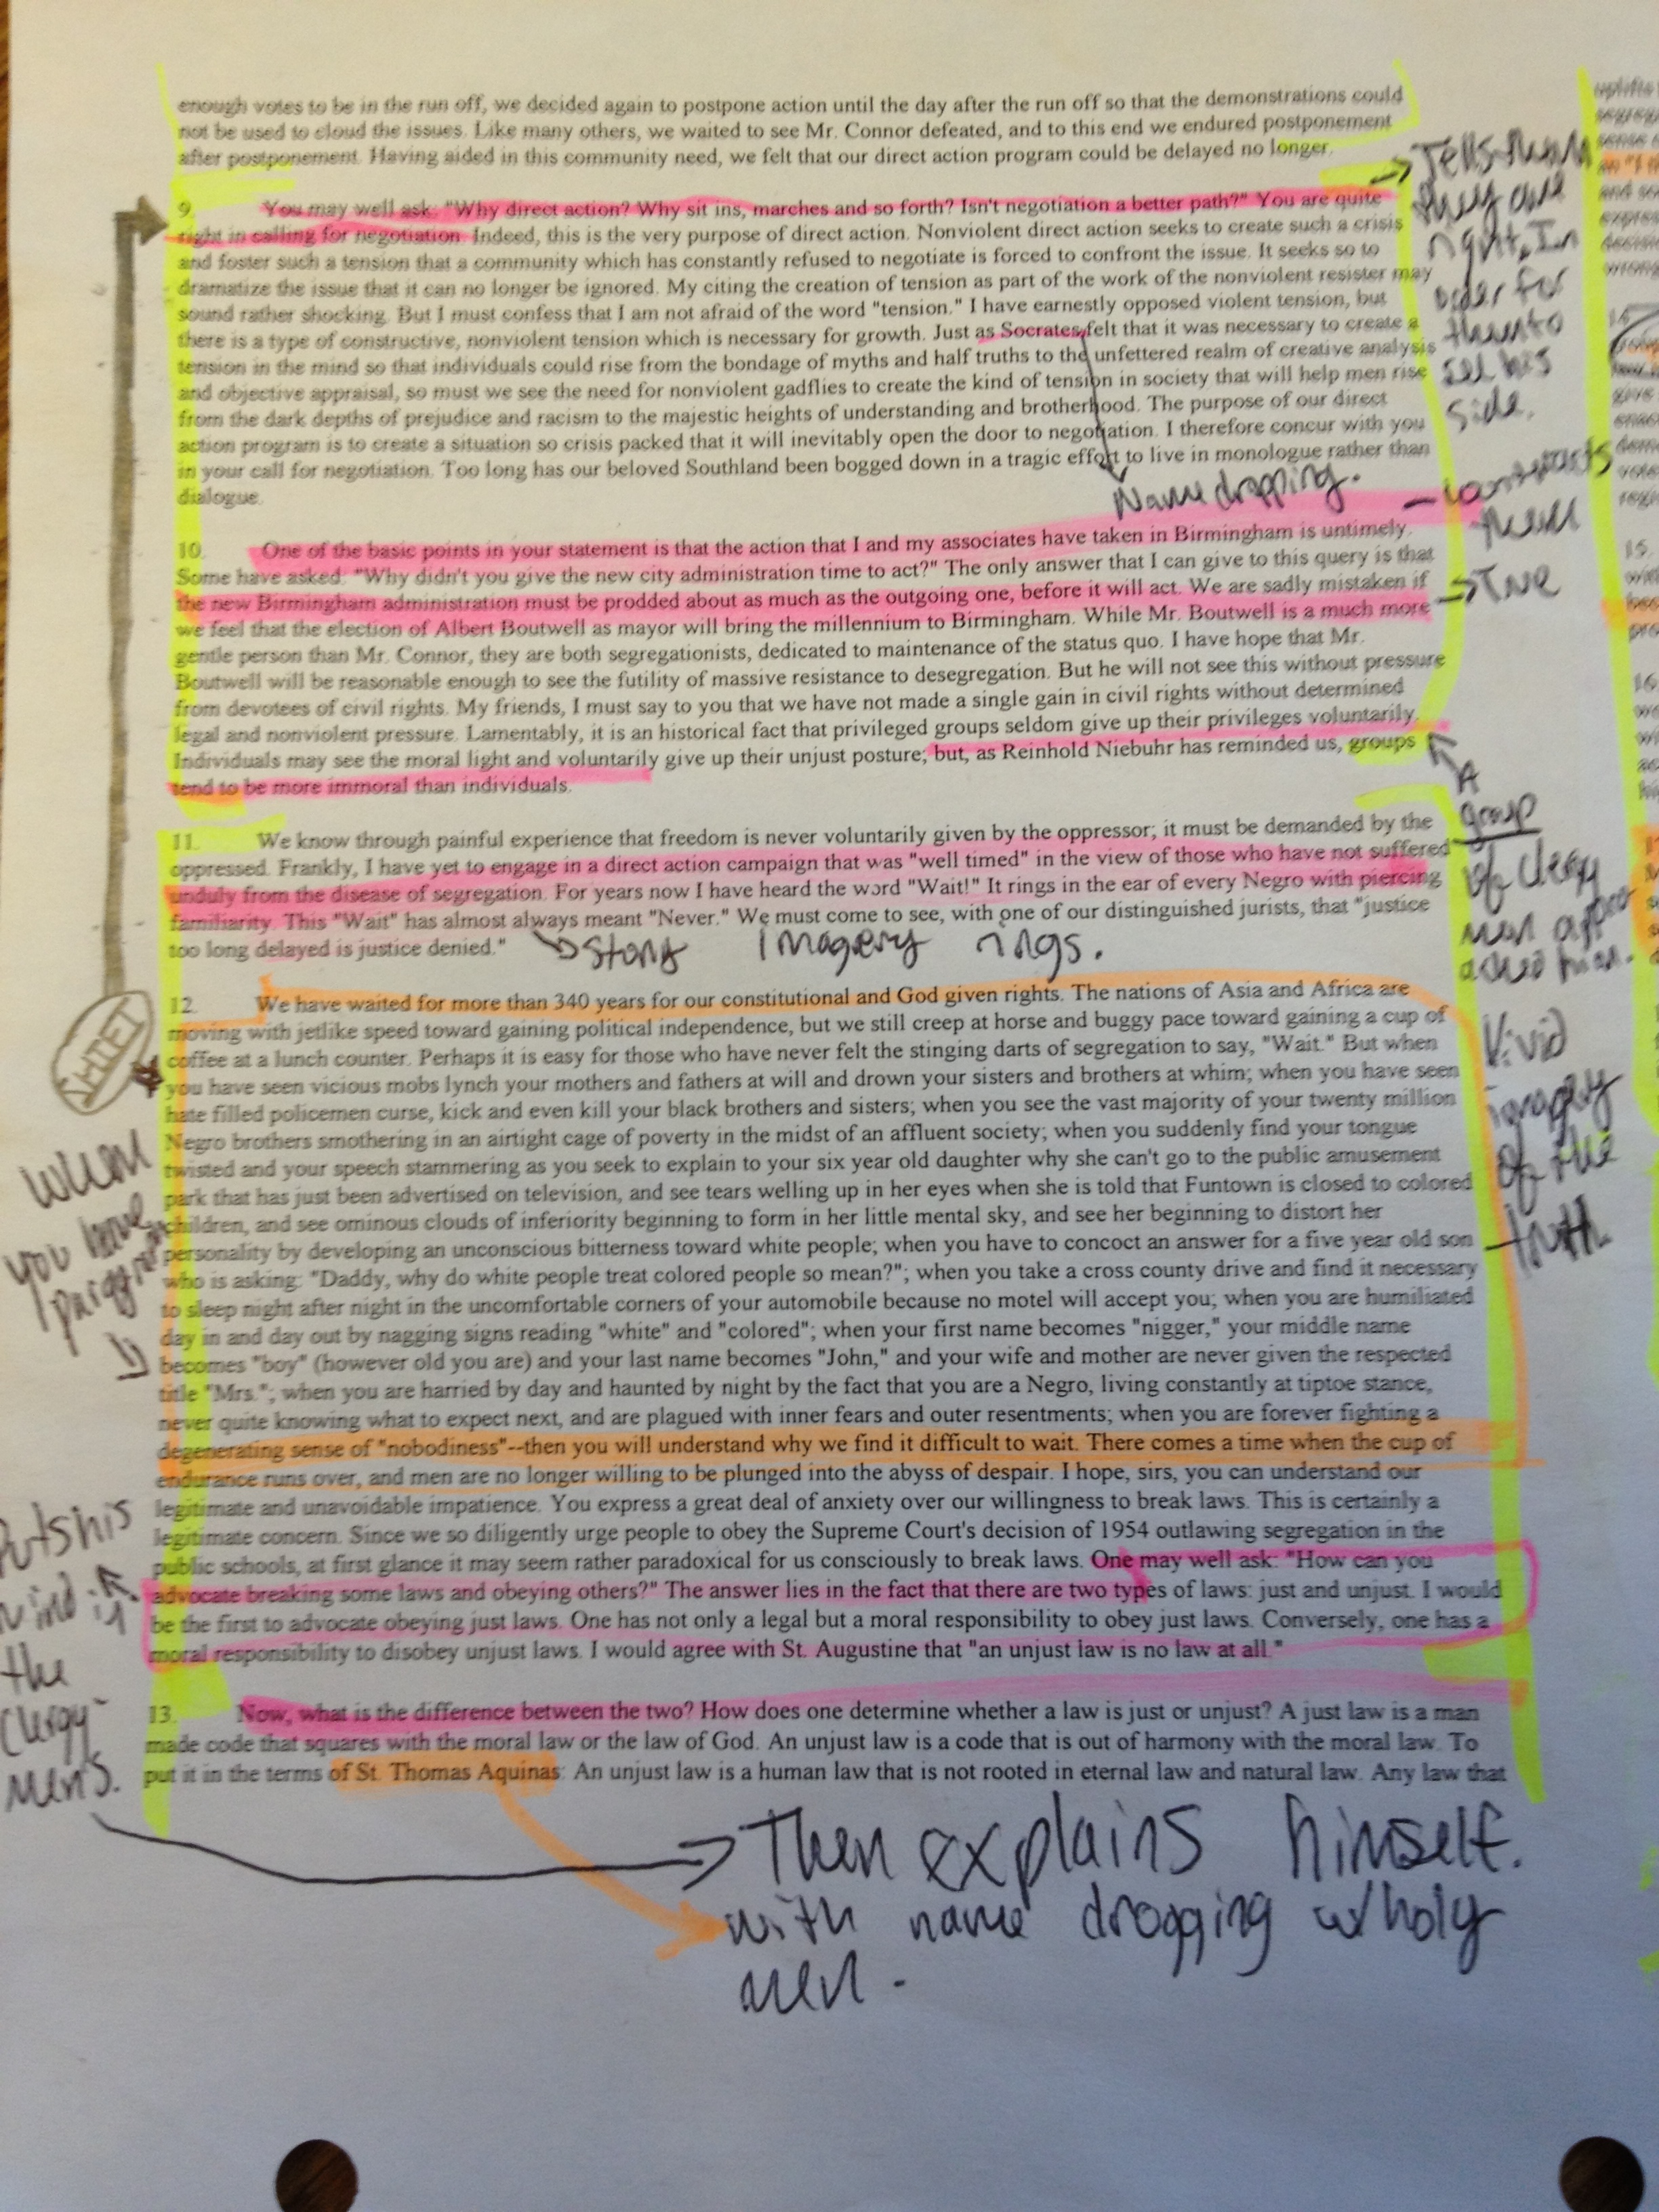 Reading Response Analysis to King’s “Letter From a Birmingham Jail” | Lauren ...